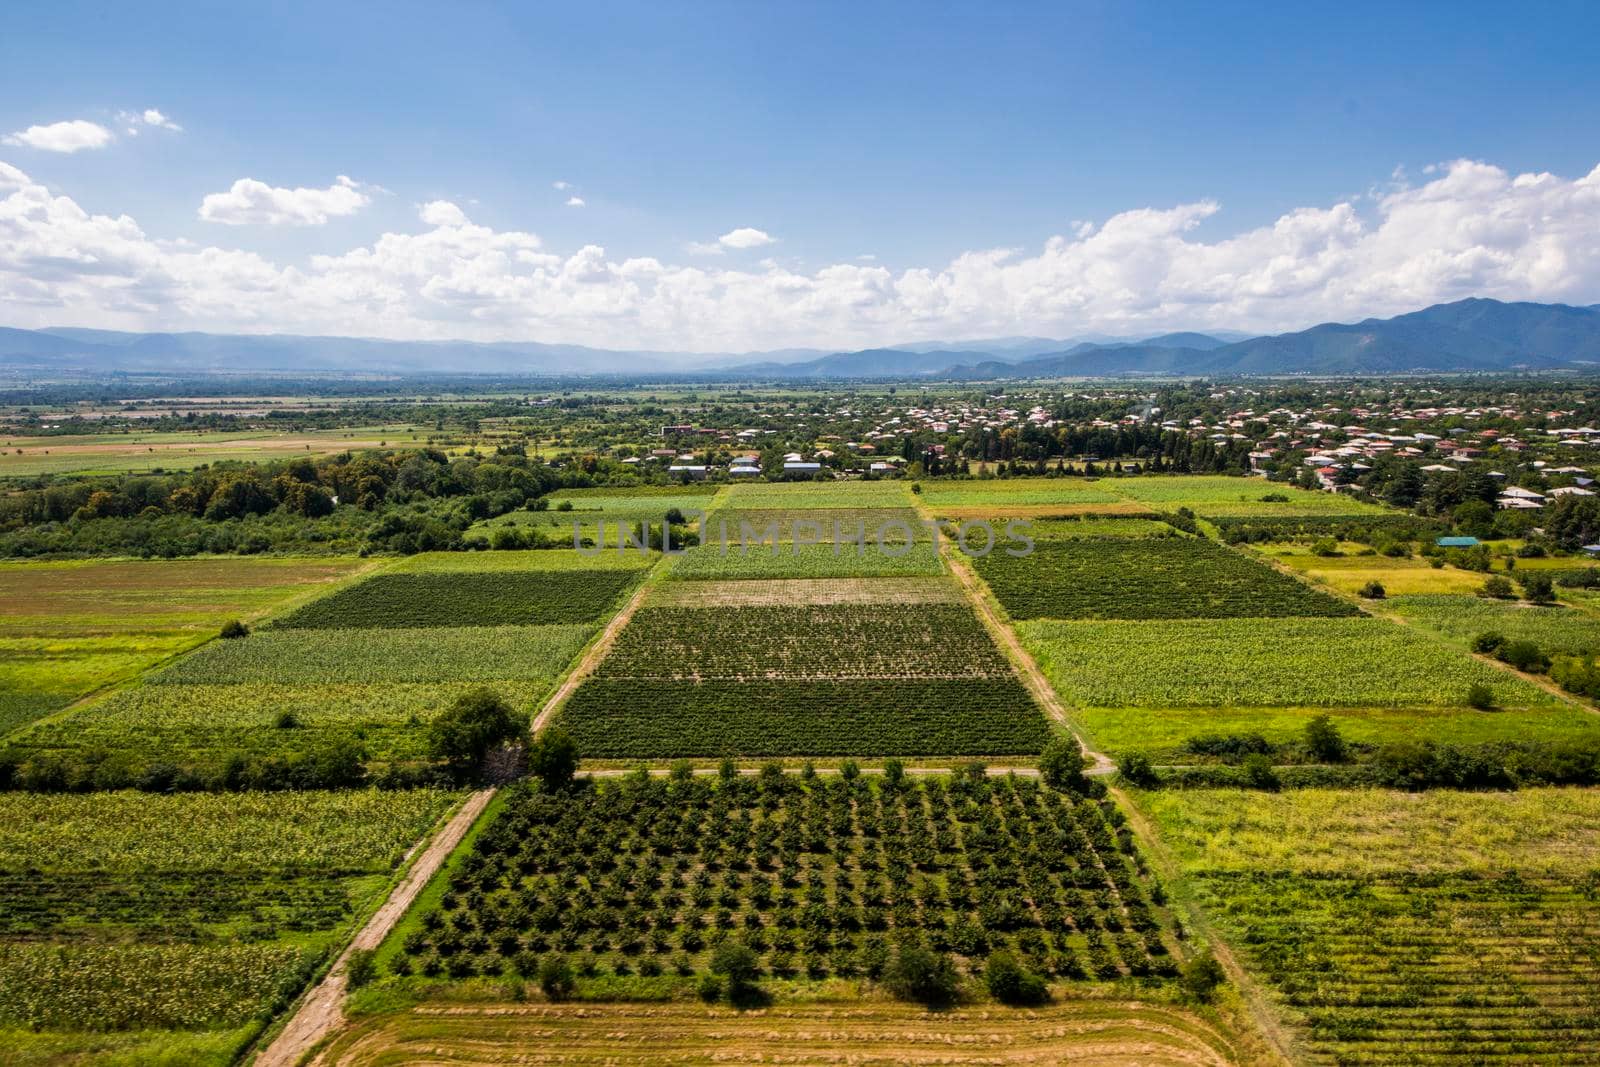 High angle view of agricultural fields in Kakheti, Georgia by Taidundua